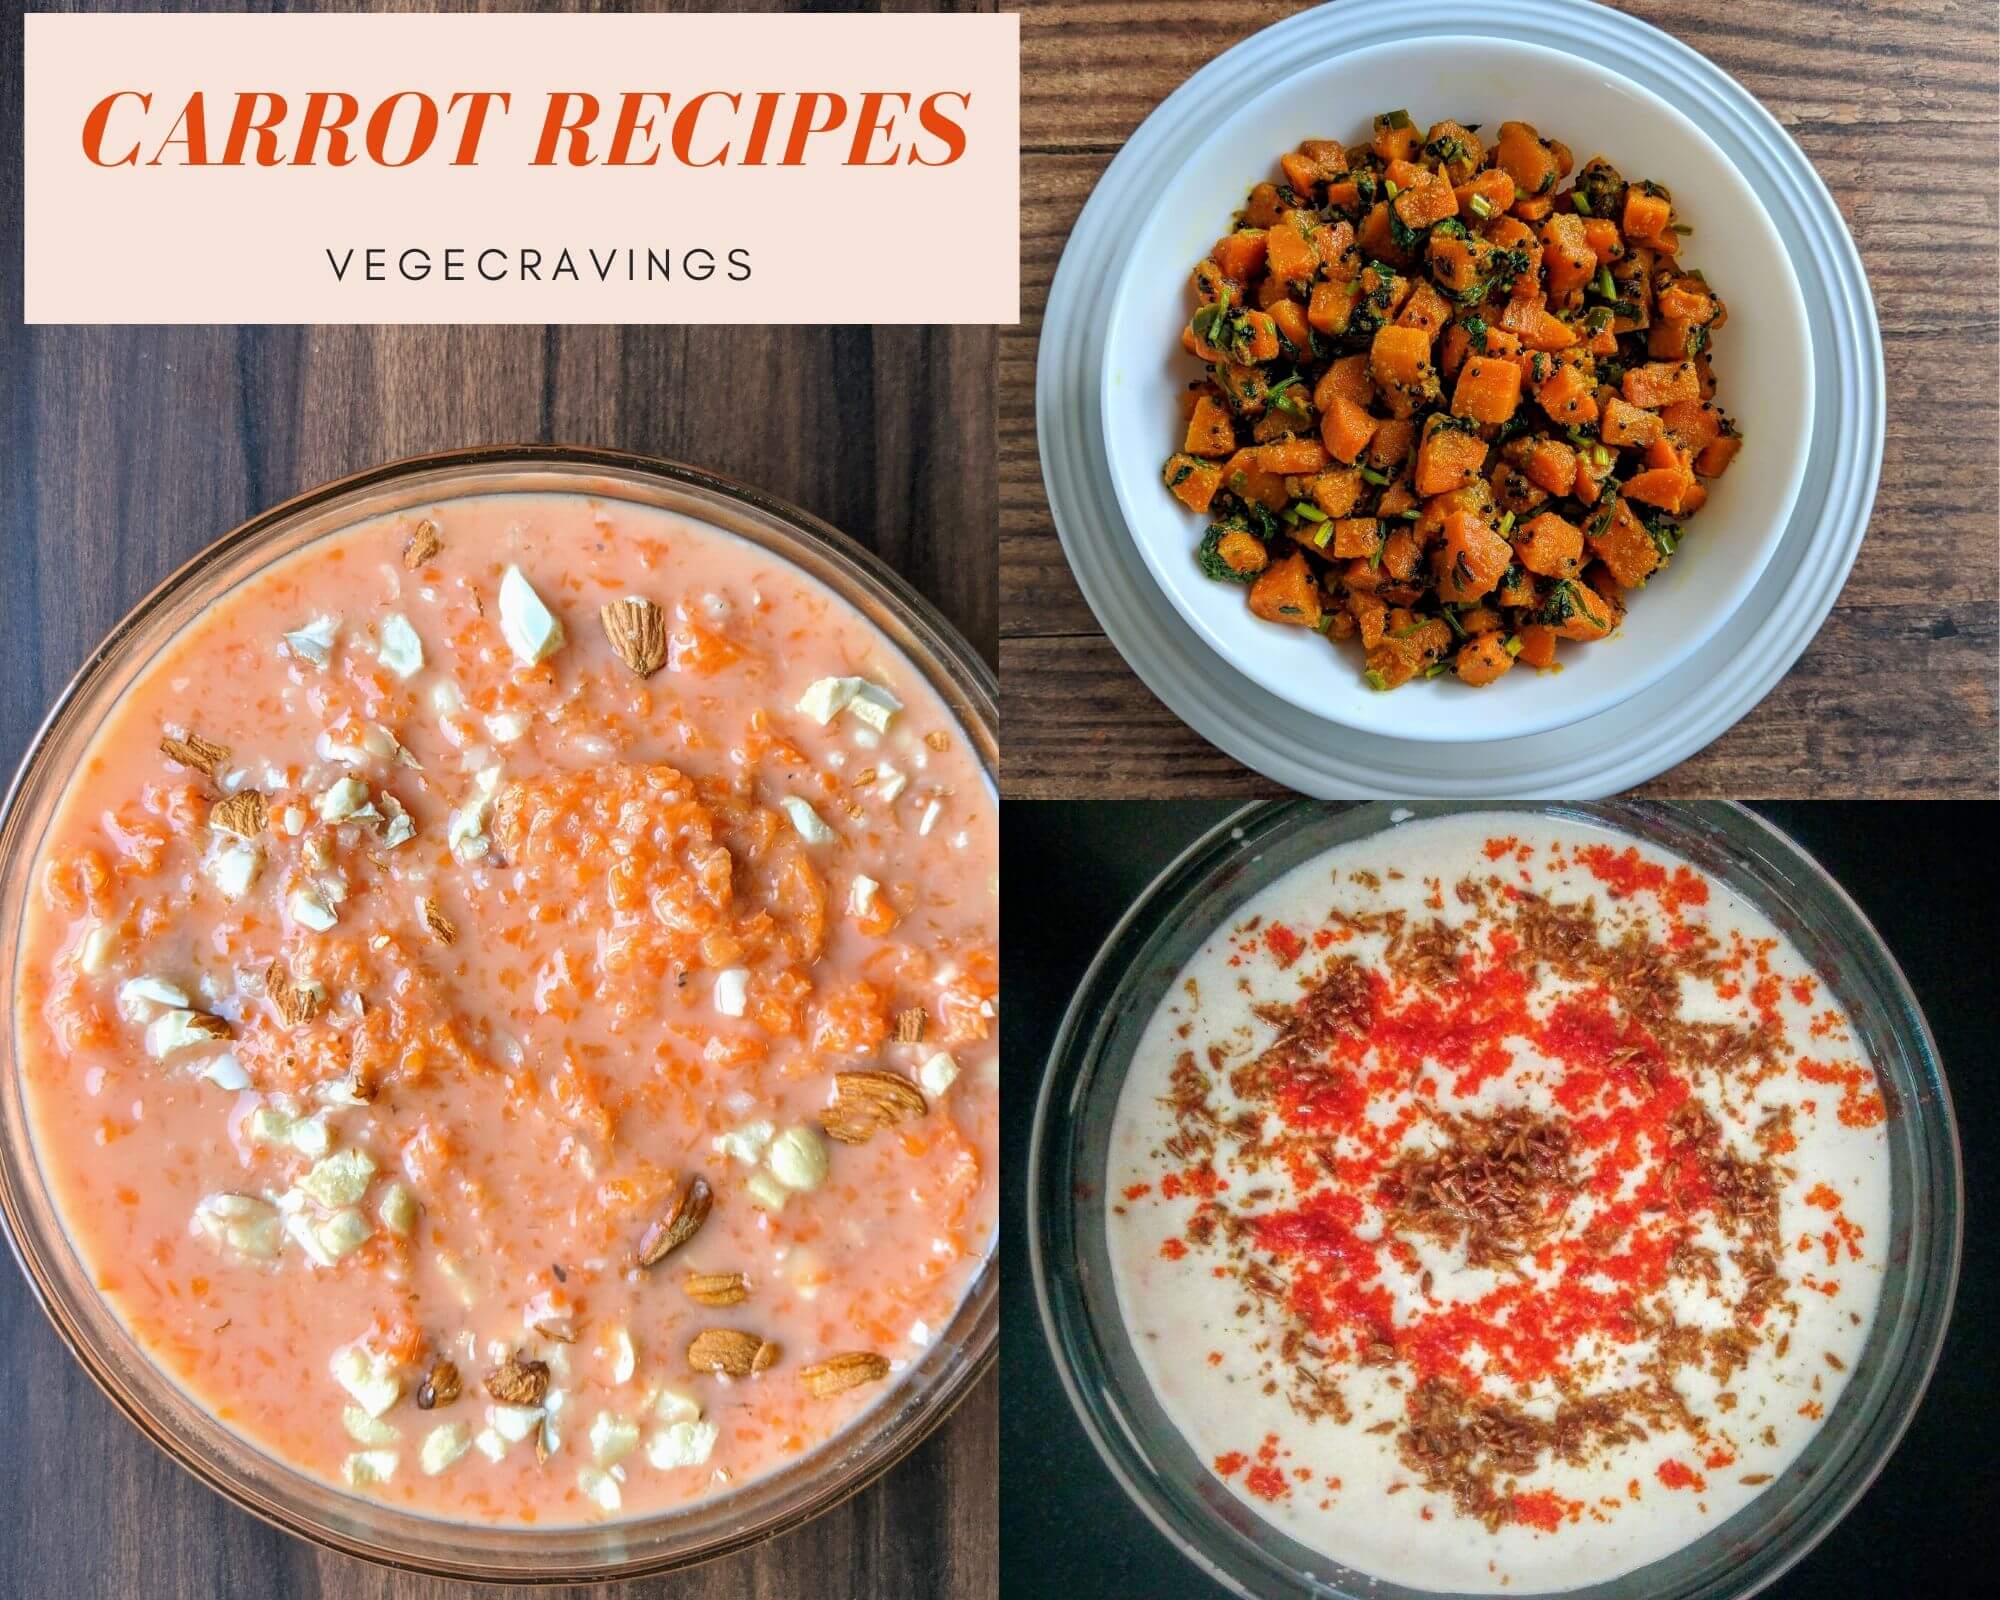 Here is a list of some delicious and easy to cook gajar or carrot recipes to add seasonal taste, color and nutrition to your food!